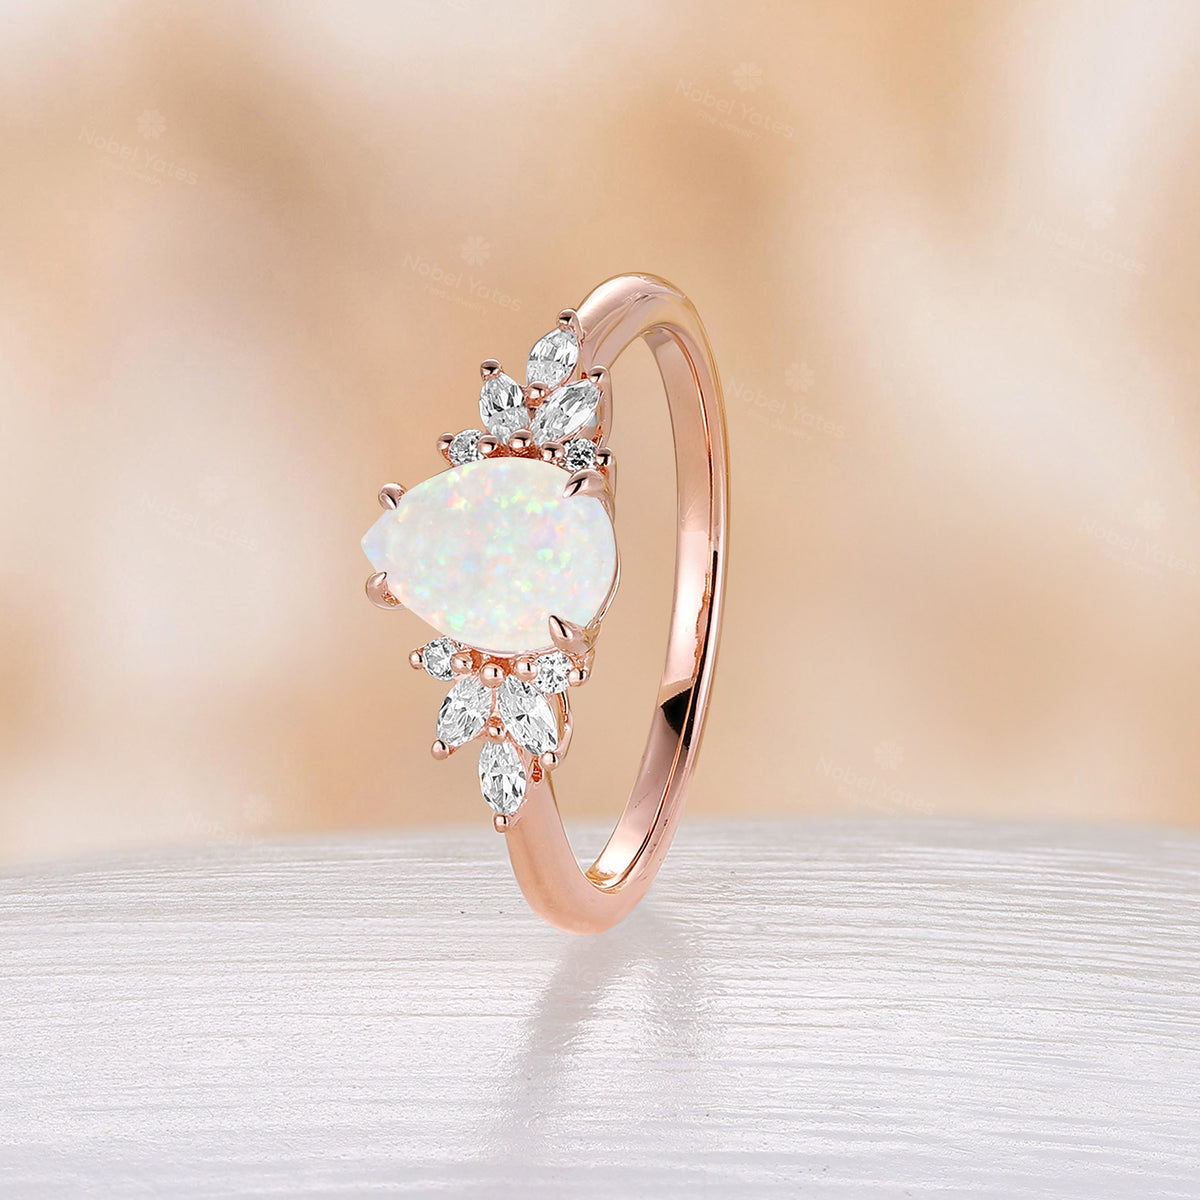 Natural White Opal Pear Cut Marquise Moissanite Cluster Engagement Ring